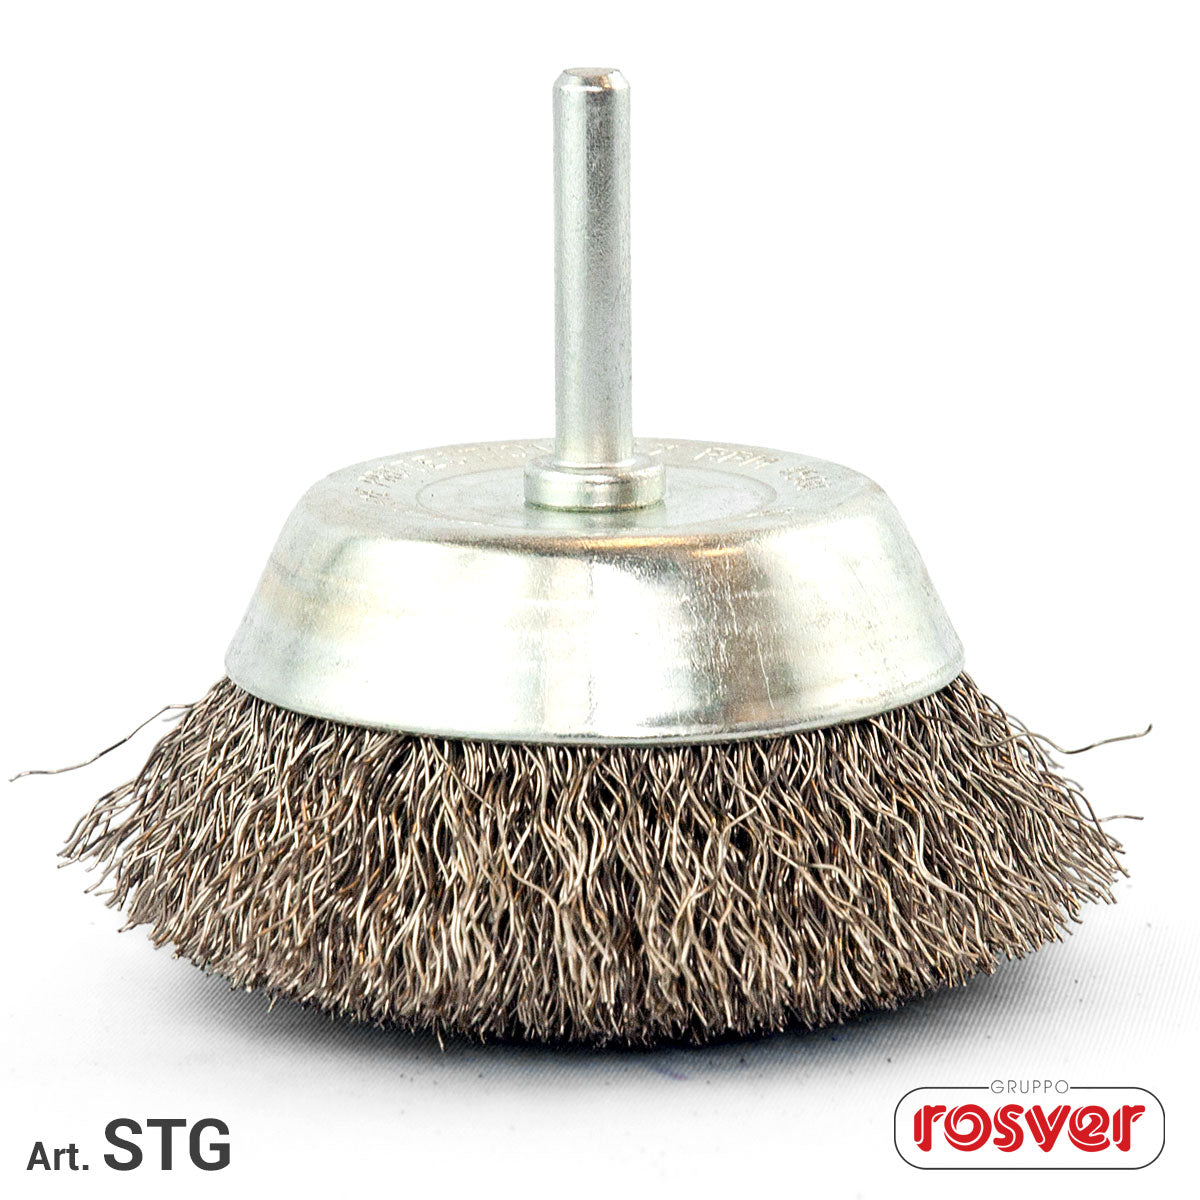 Cup Brush with Shaft - Rosver - STG G.6 Inox - Conf.20pz